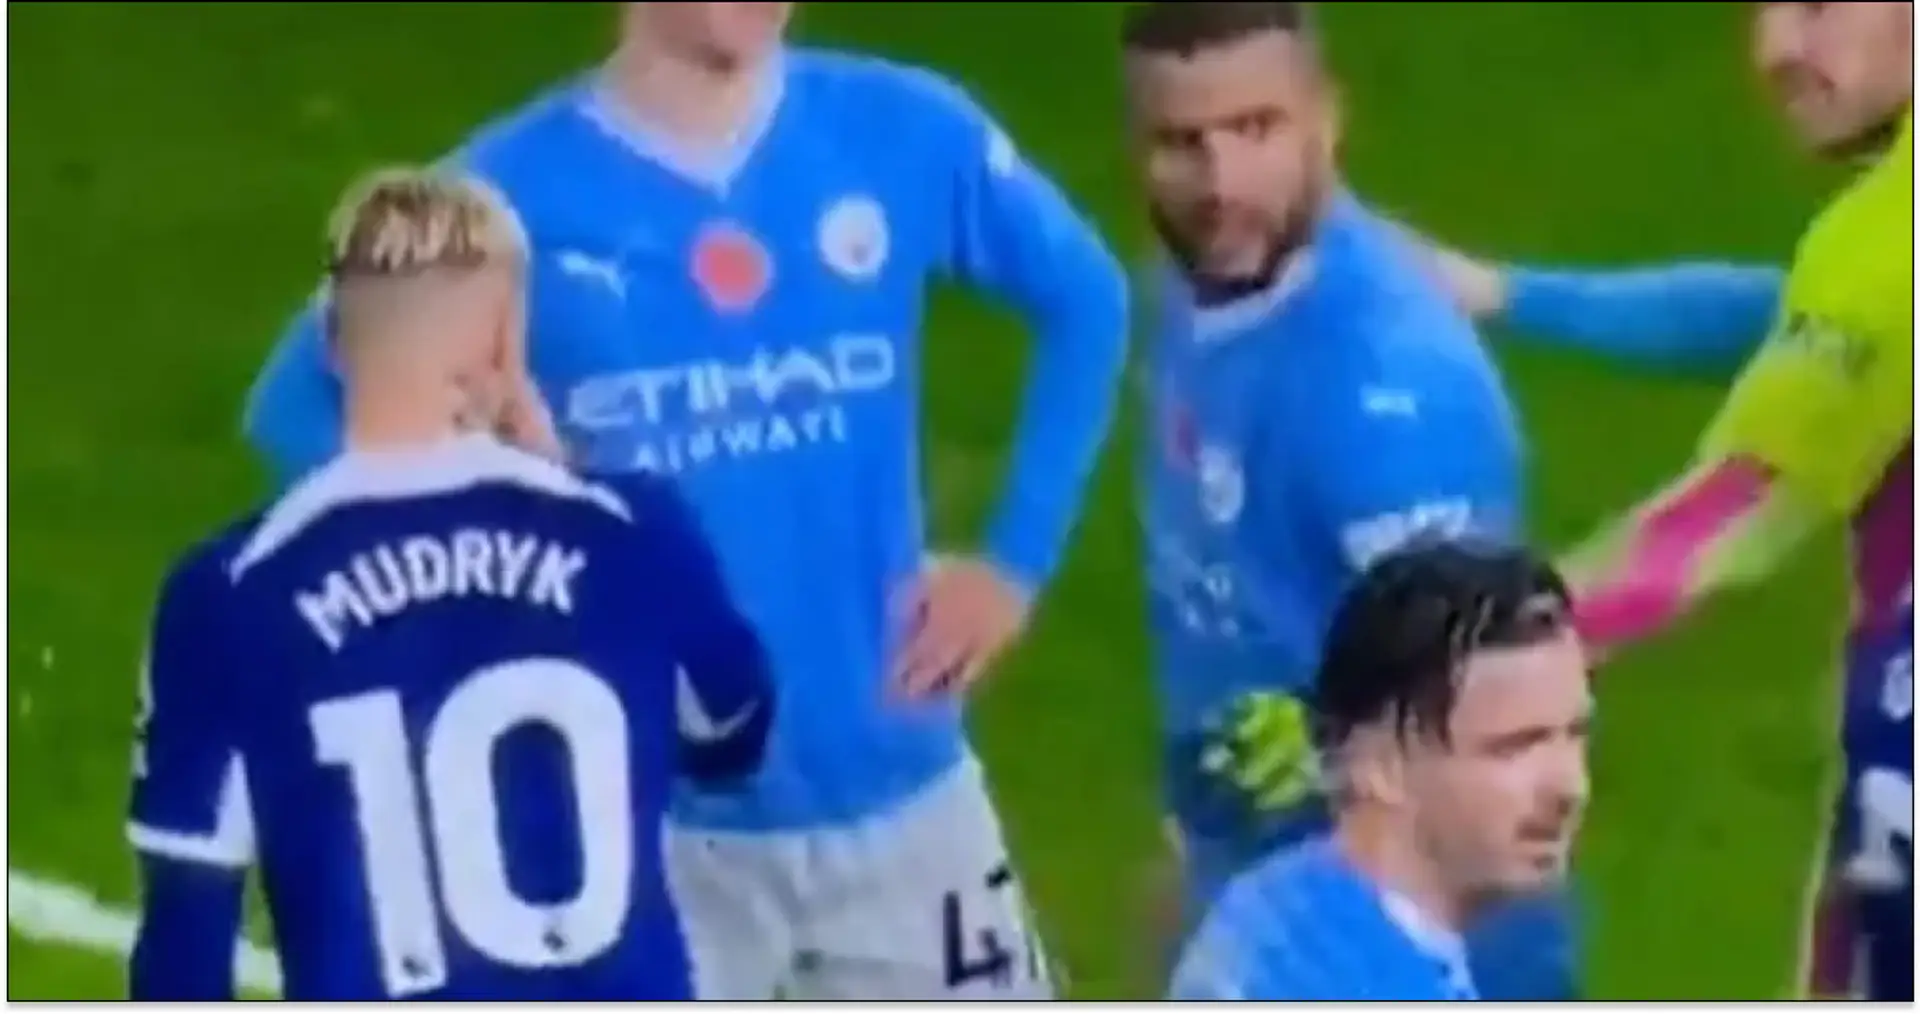 'That's a s***housery award': Mudryk appears to wipe snot on Walker's shirt